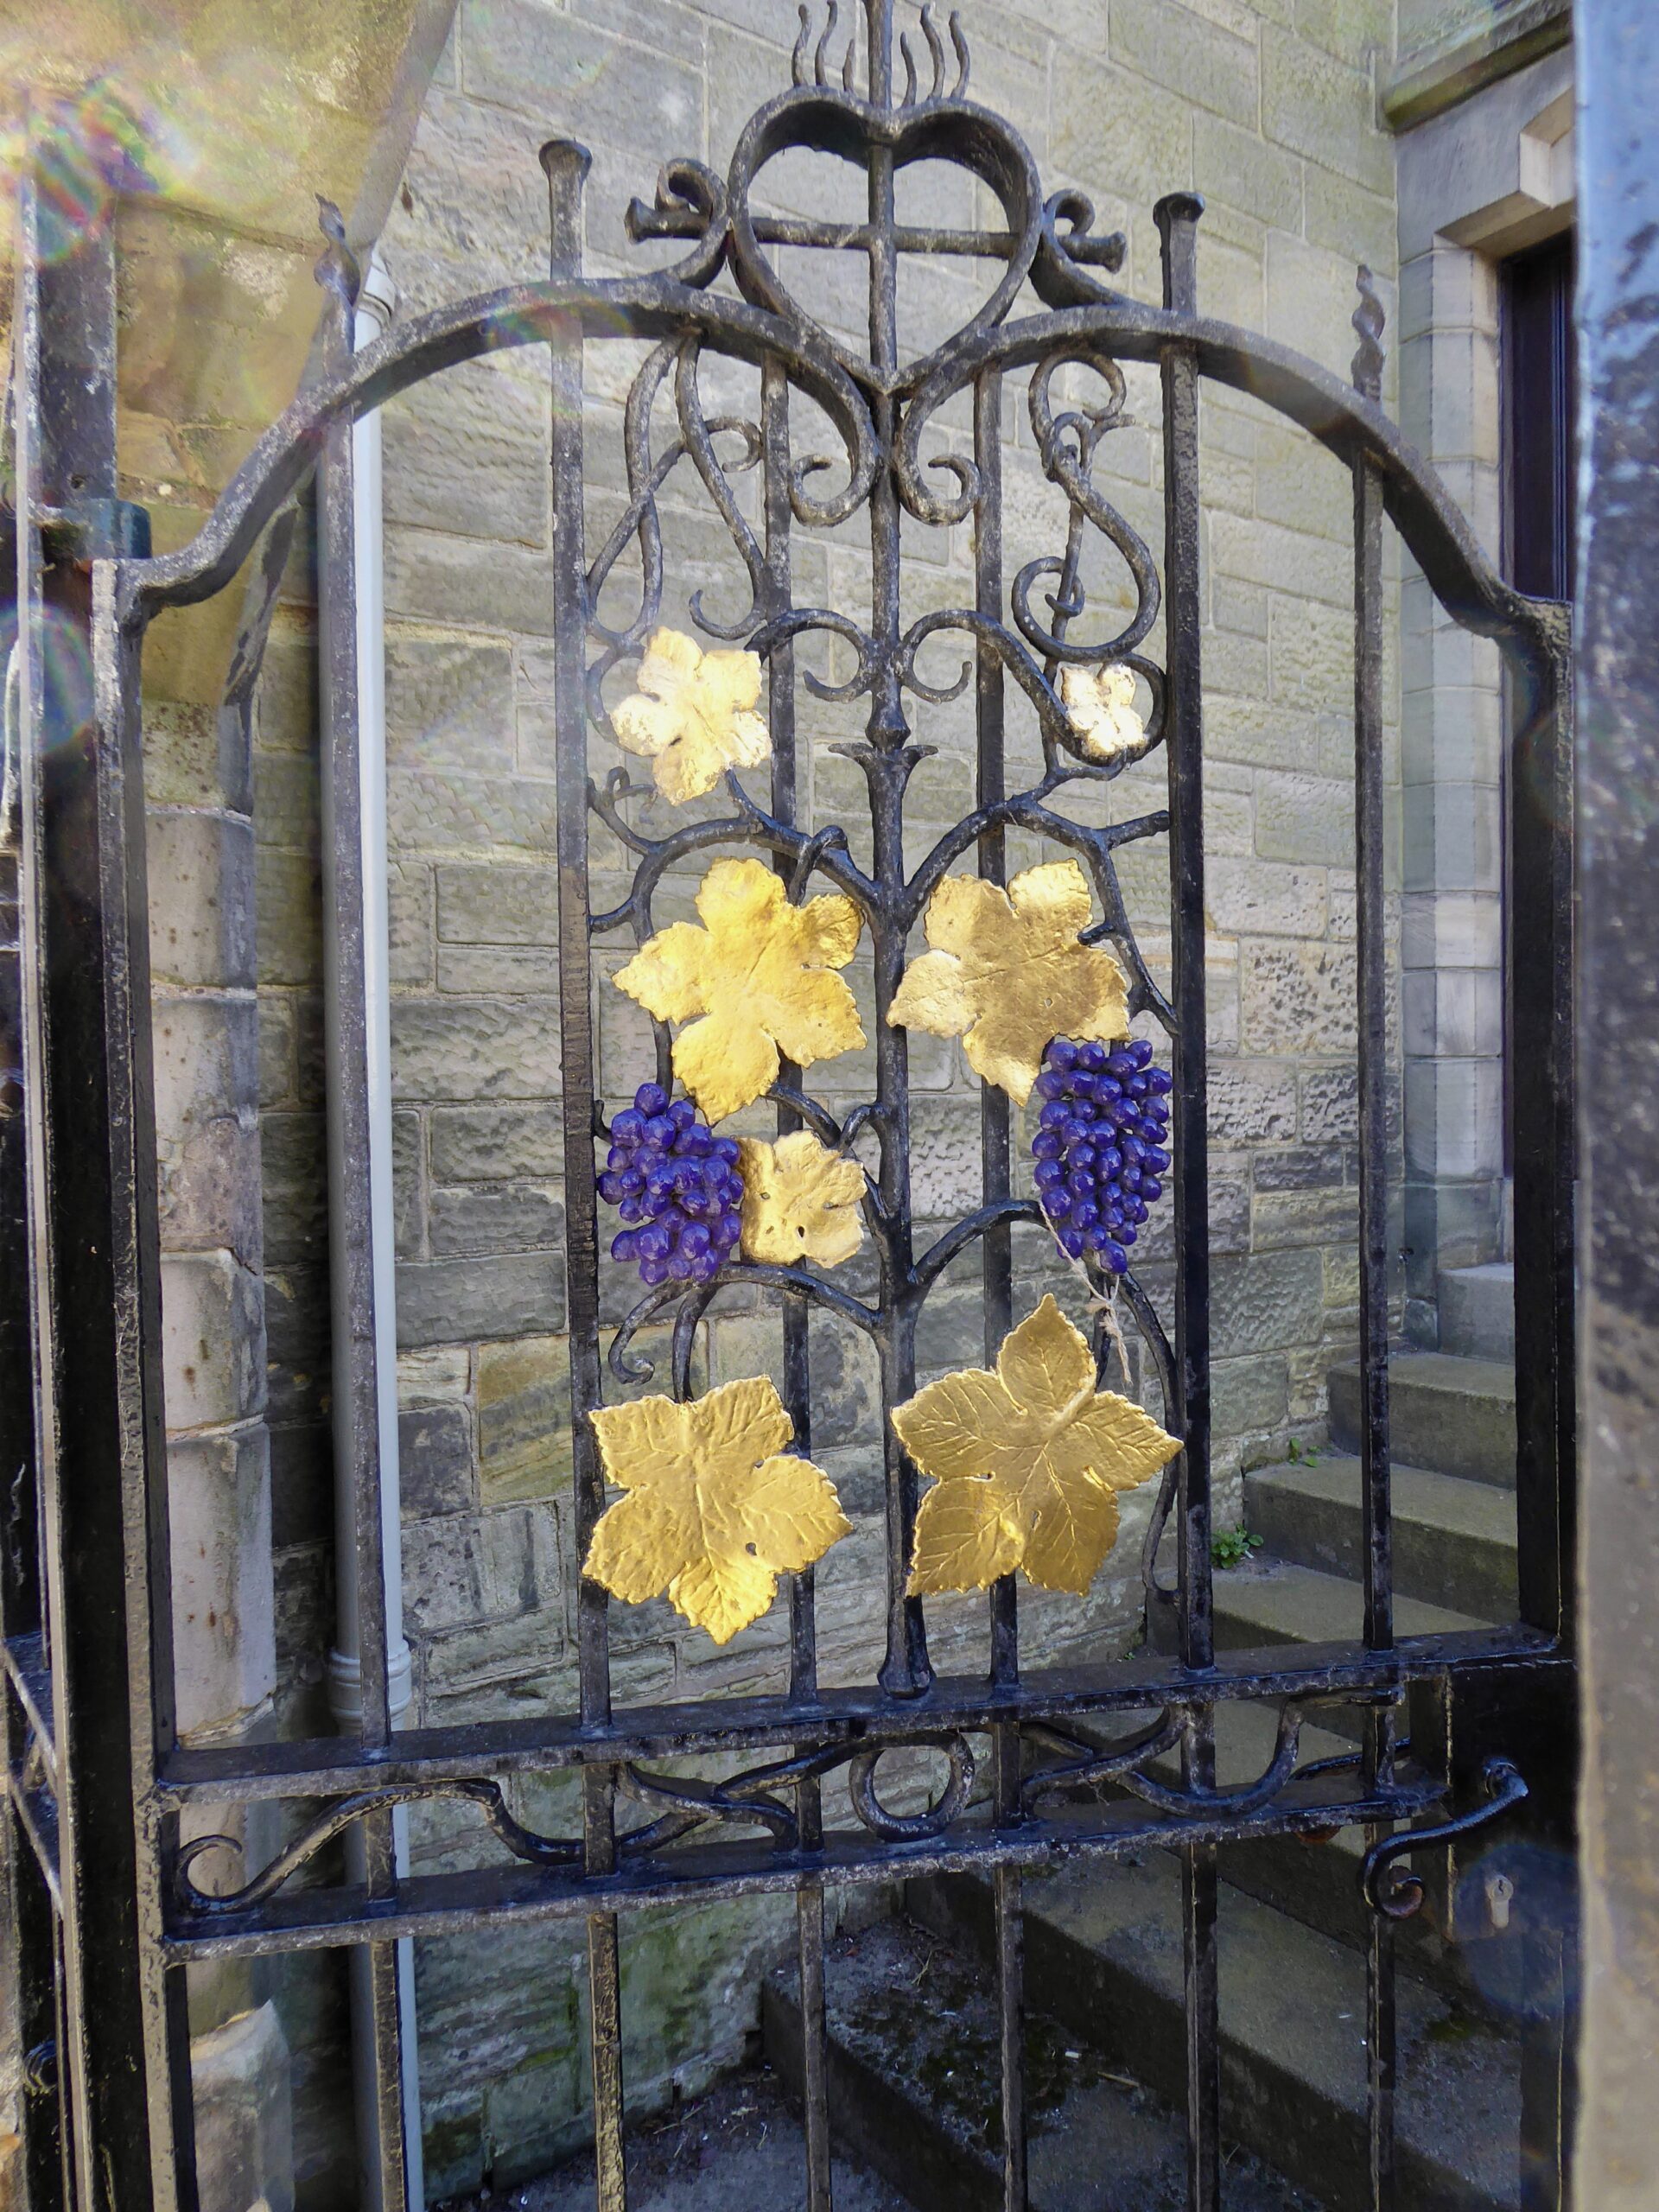 Ornamental wrought iron gate, ornamented with gilt leaves and purple grapes